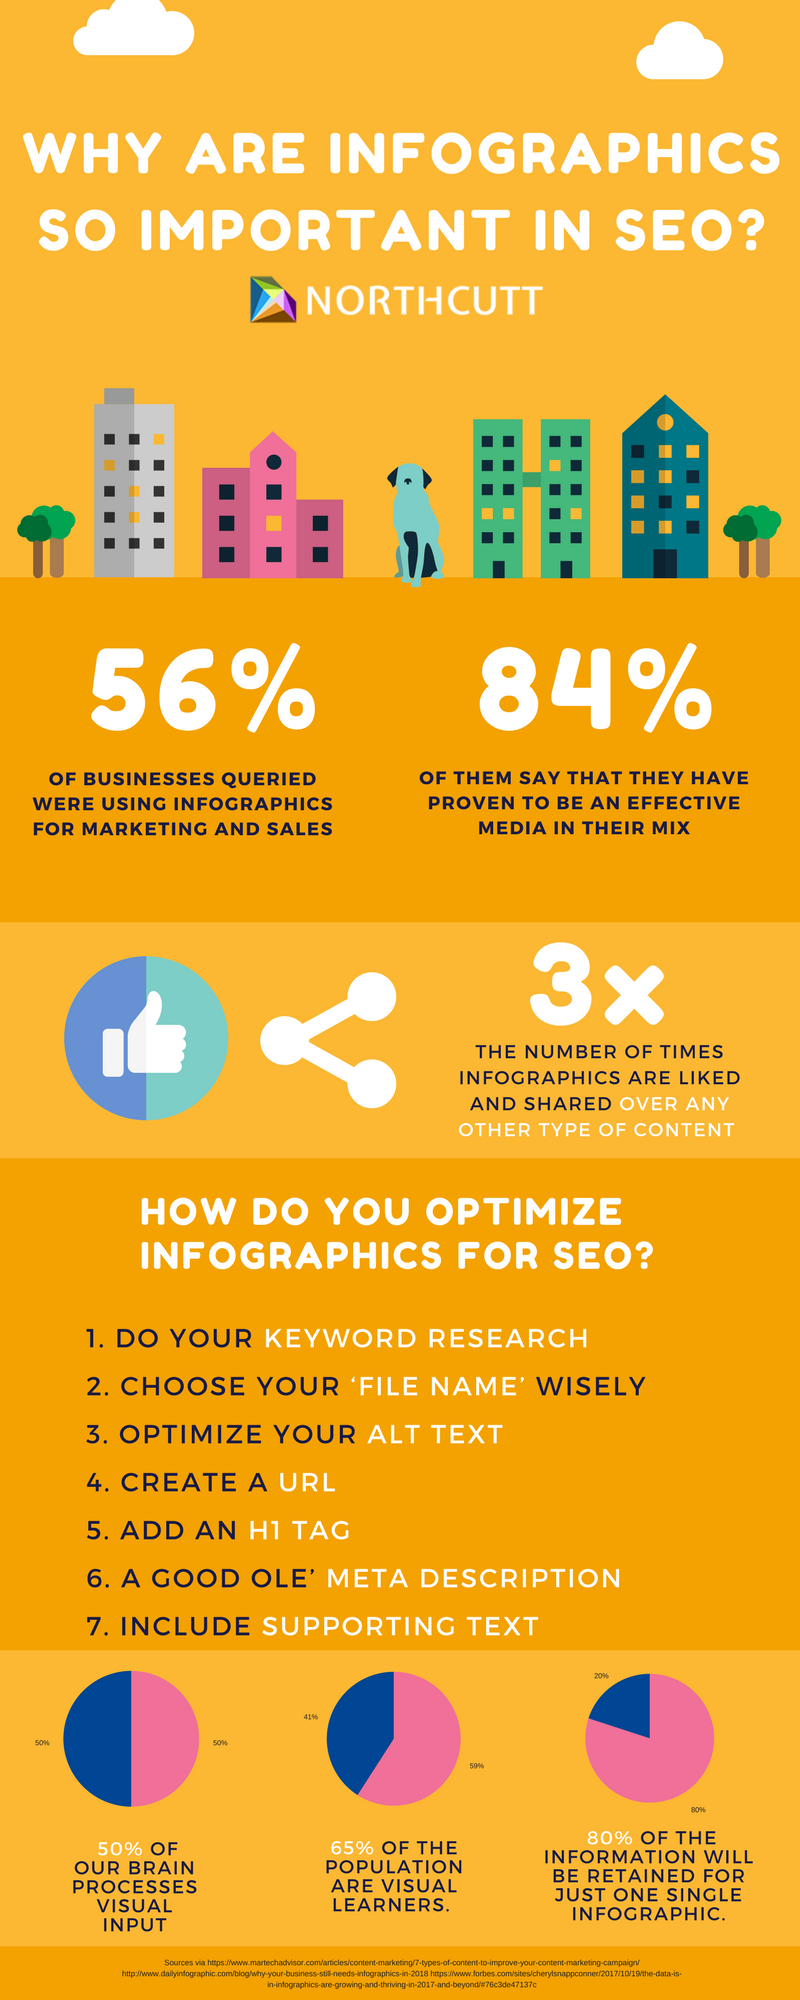 Why Are Infographics So Important in SEO